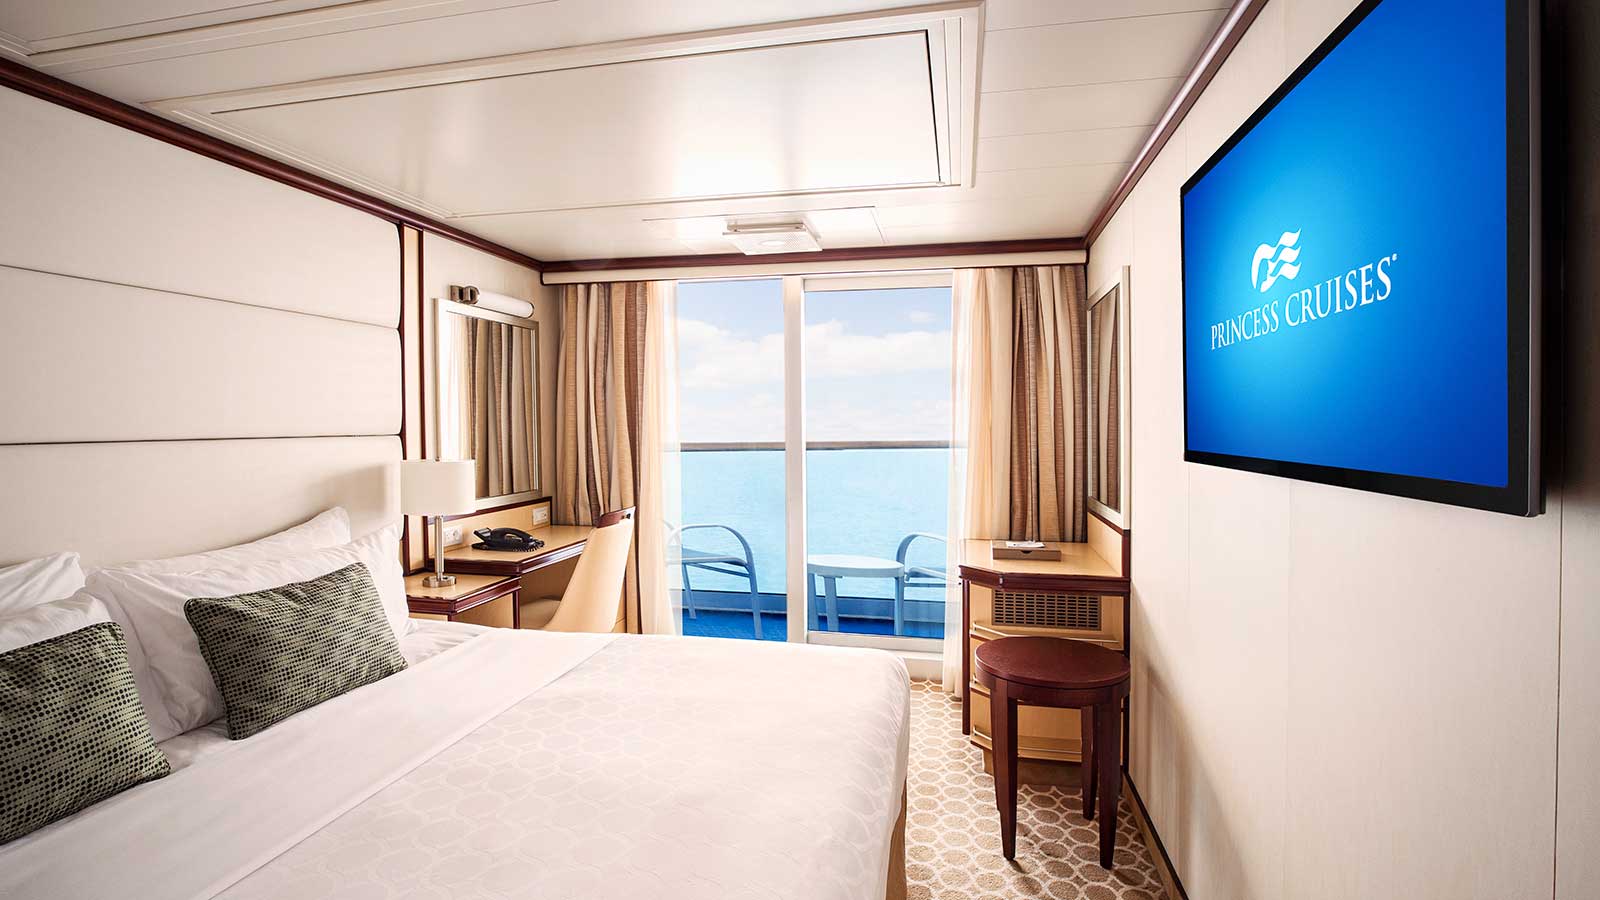 Image of Balcony Accommodation, sourced from: Princess Cruise Lines https://www.princess.com/images/global/ships-and-experience/ships/products/staterooms/royal-class-balcony-1600.jpg